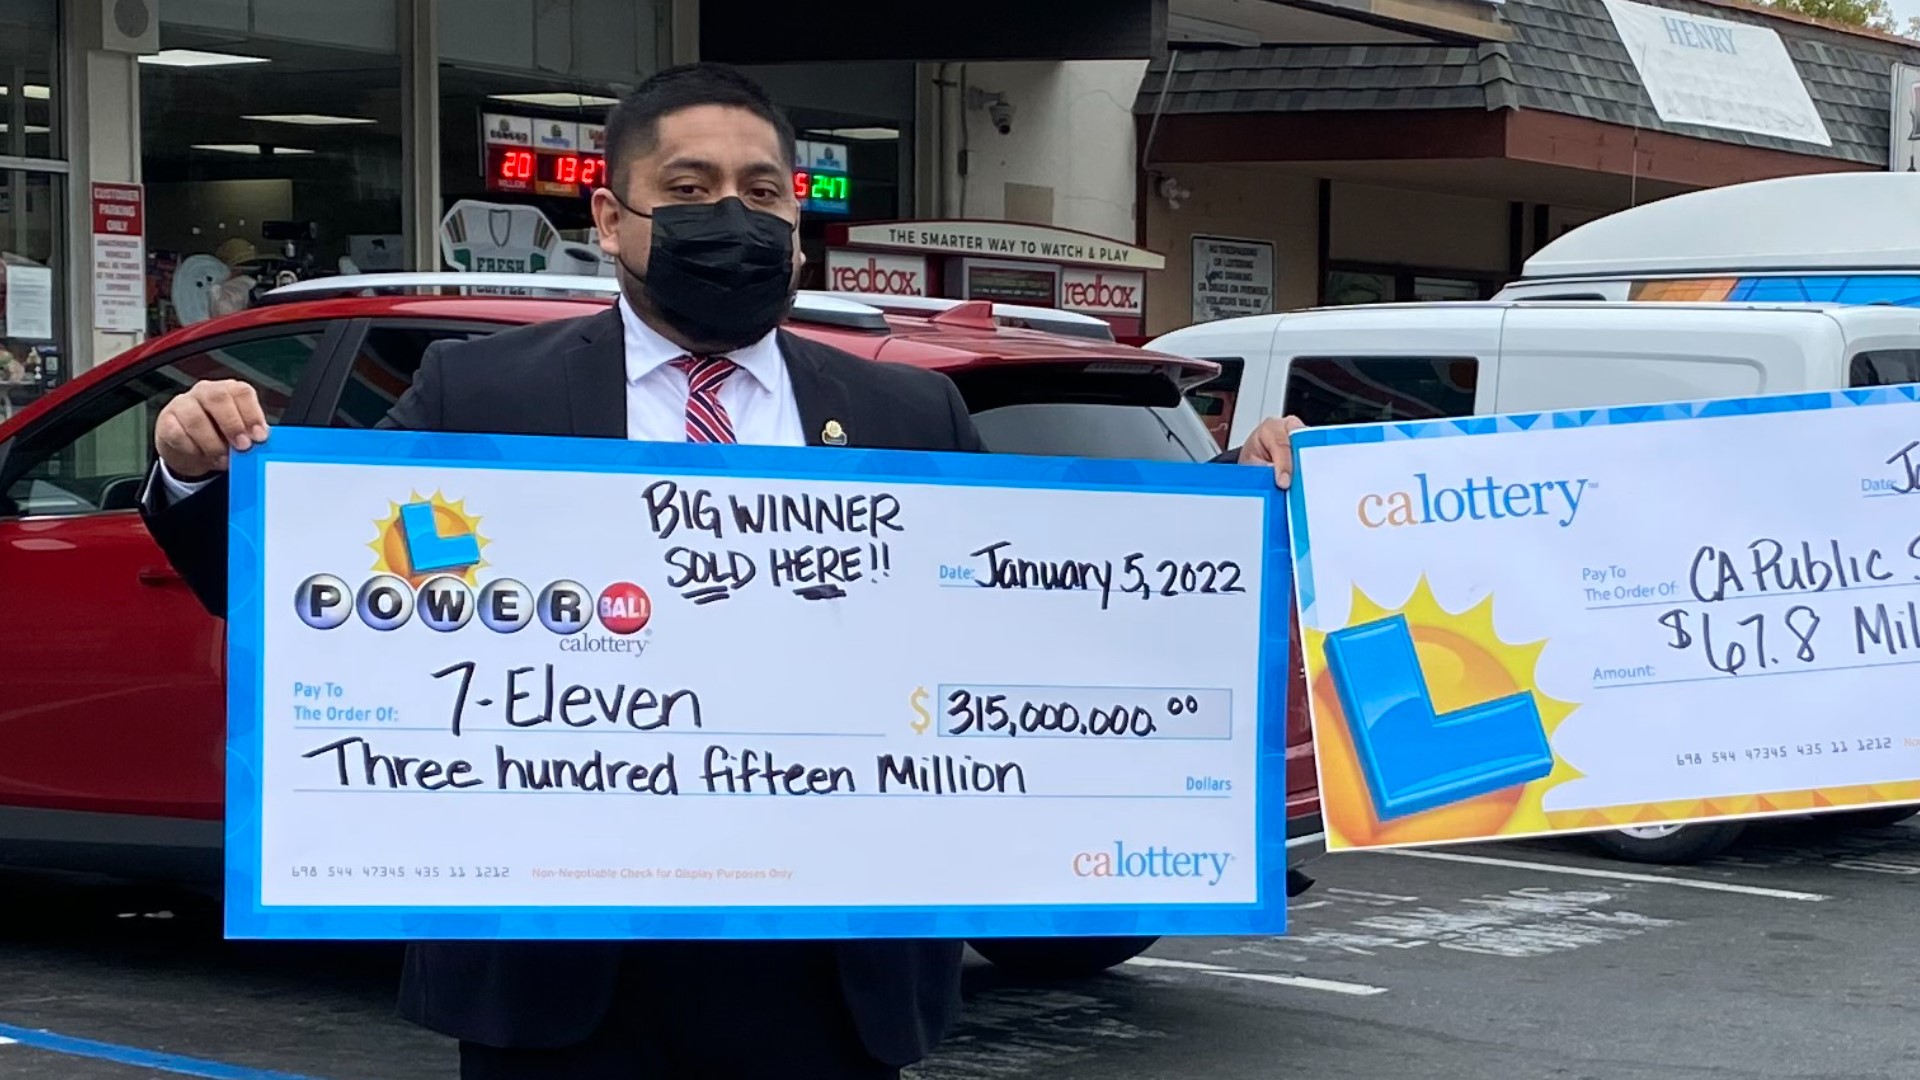 One lucky customer who bought a Powerball lottery ticket at the 7-Eleven on Windham Drive is the winner of $316,000,000.